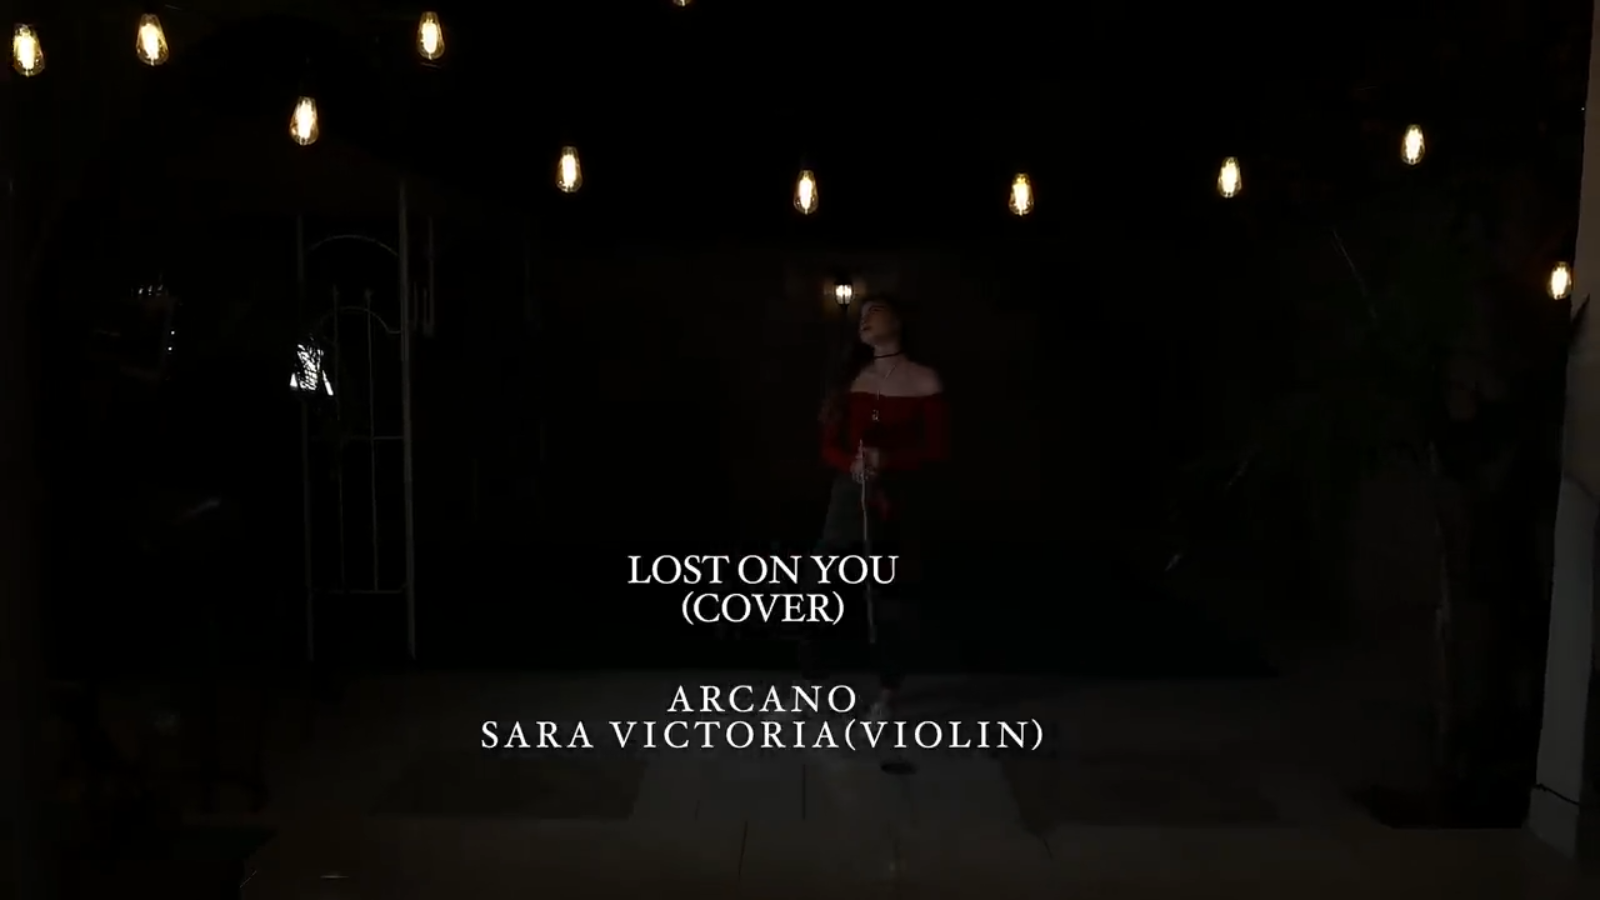 Arcano - Lost on you